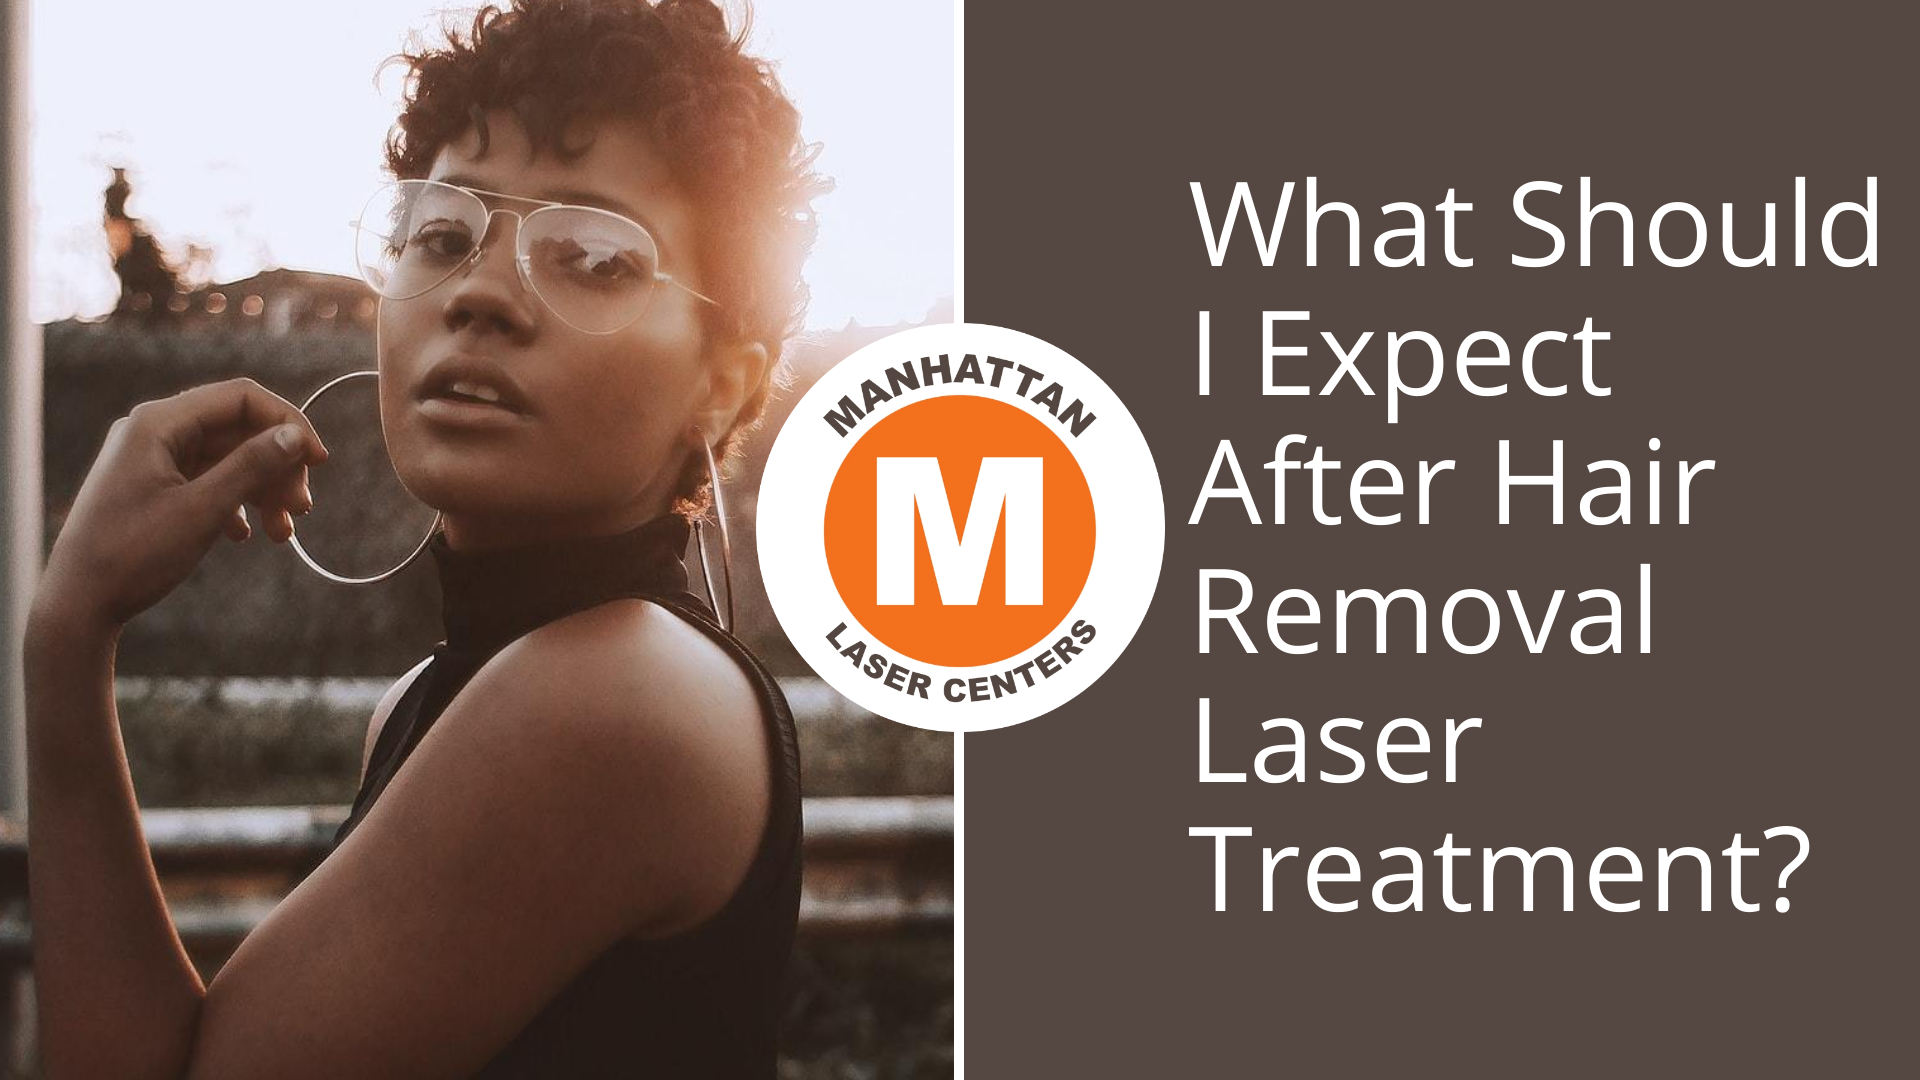 What Should I Expect After Hair Removal Laser Treatment?